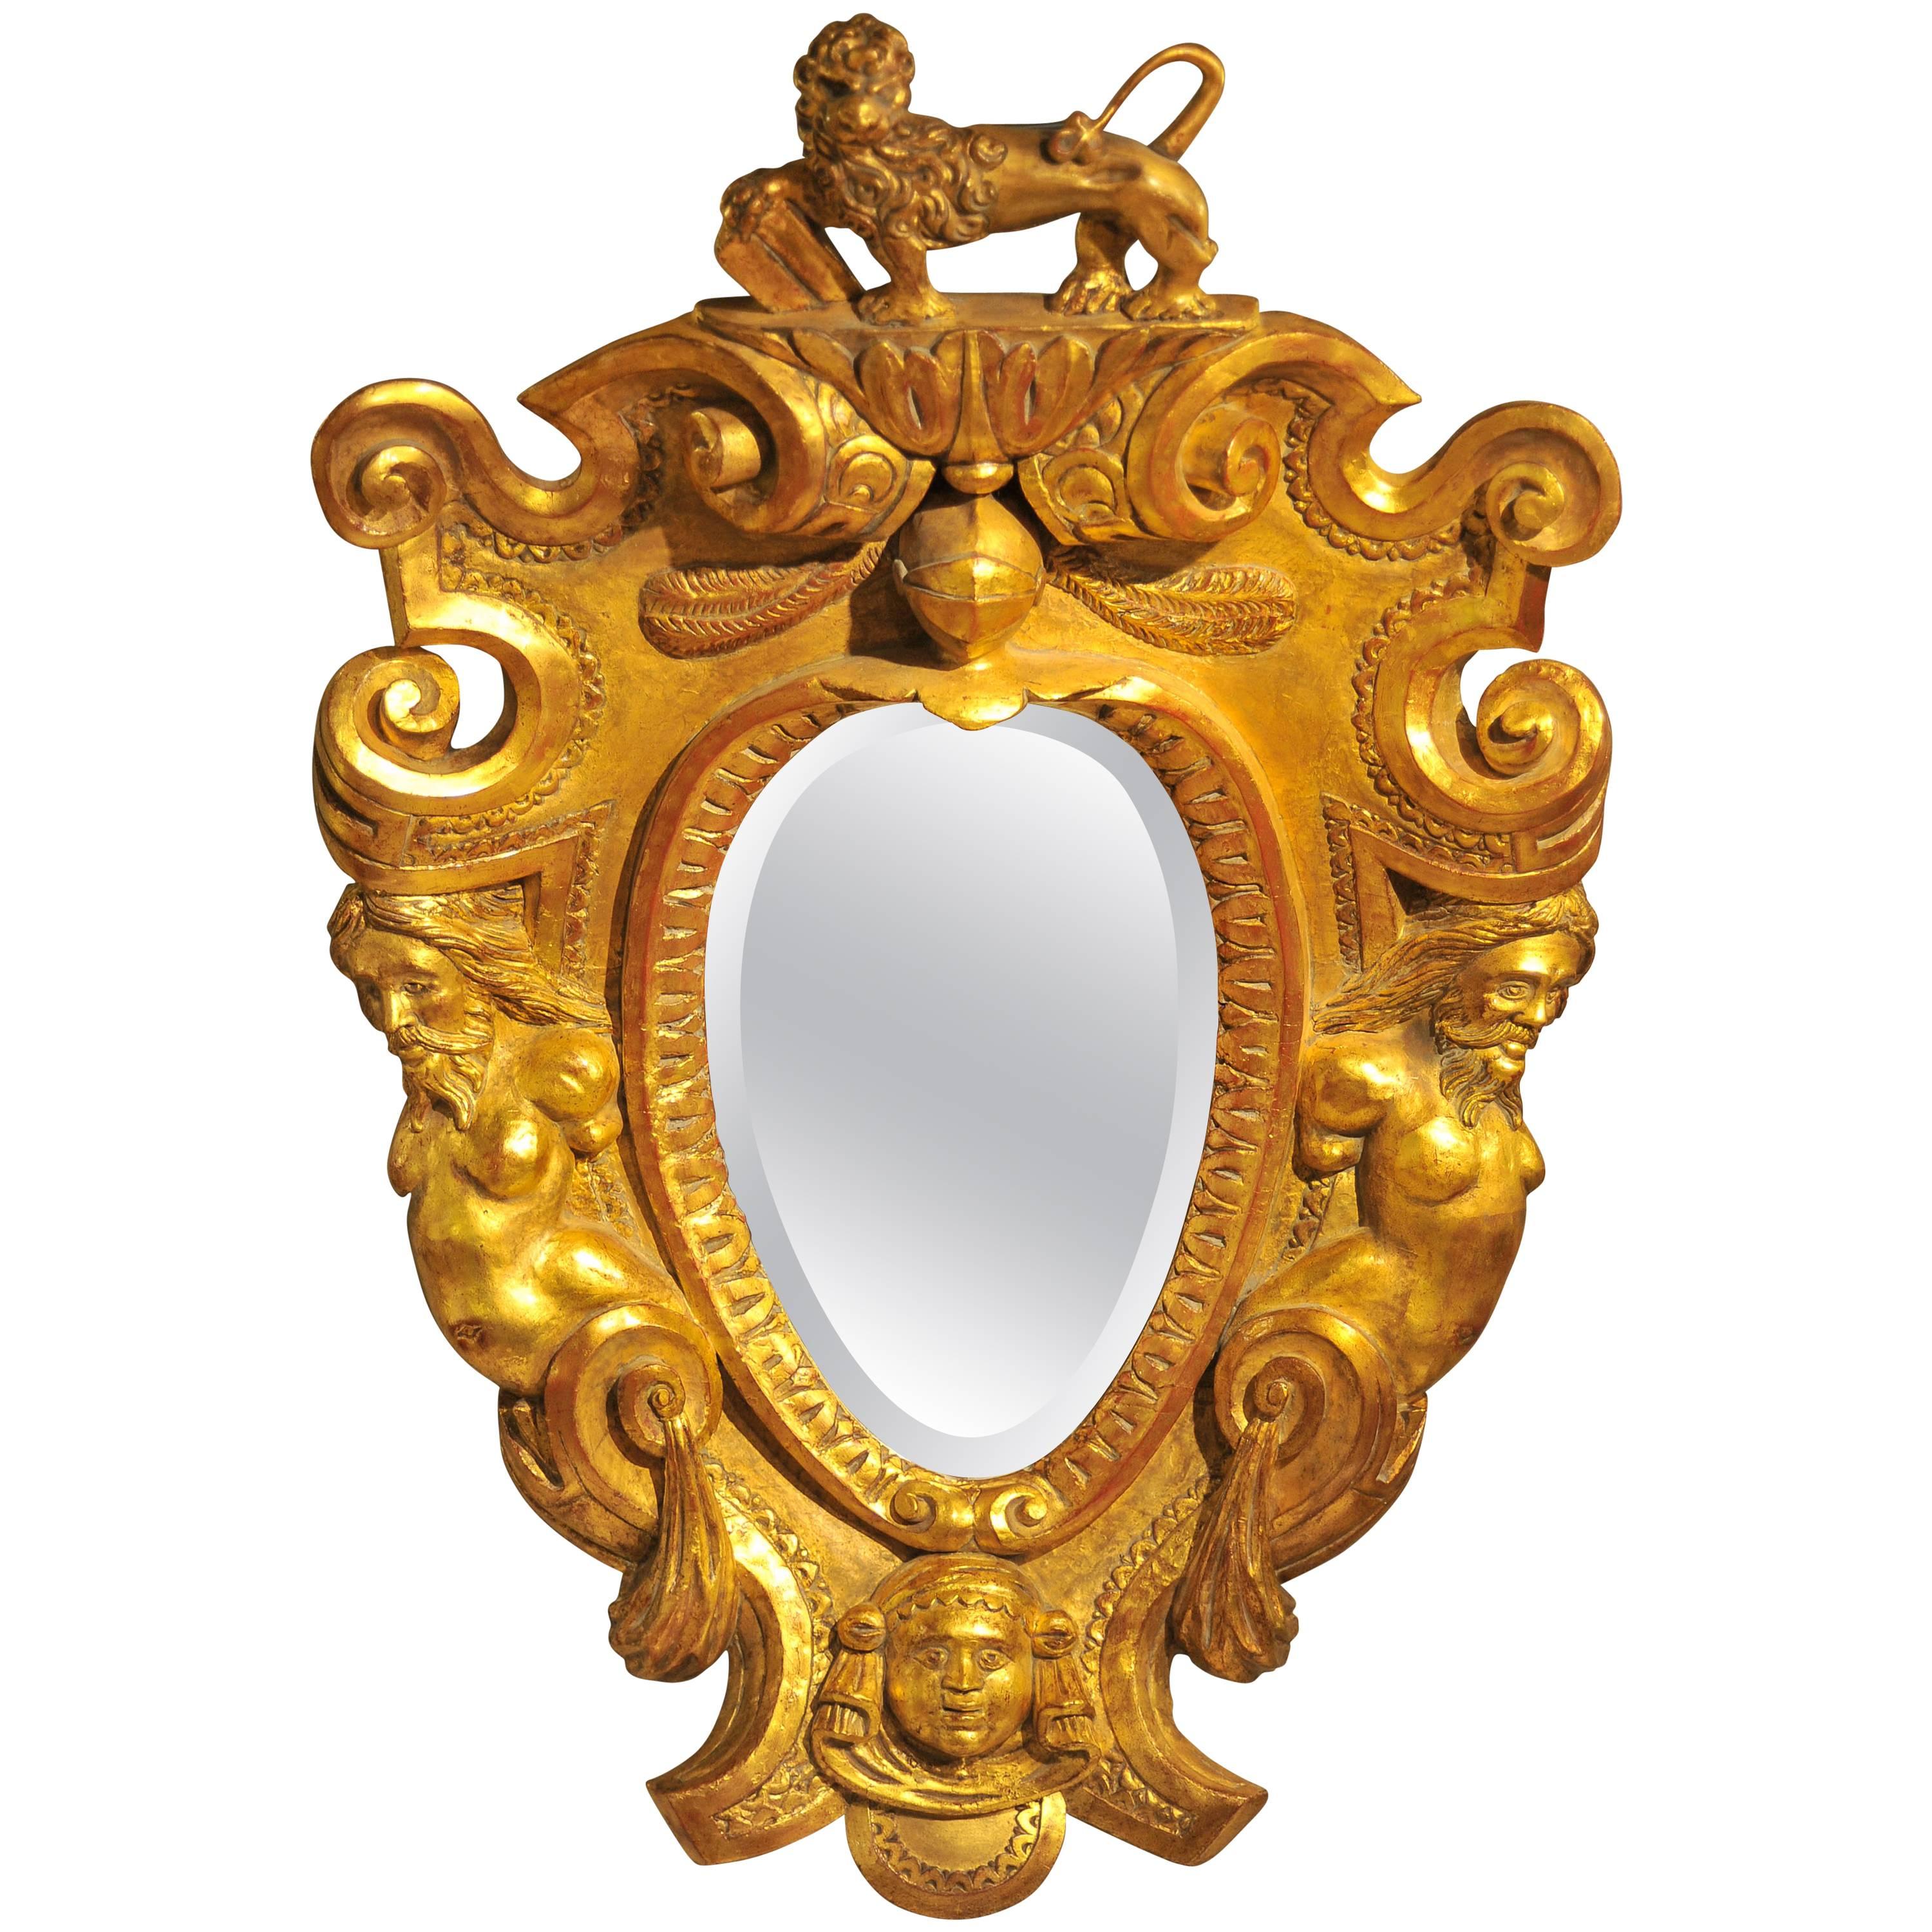 17th Century Italian Curved Mirror, Carved and Gilt wood Frame, Baroque period For Sale